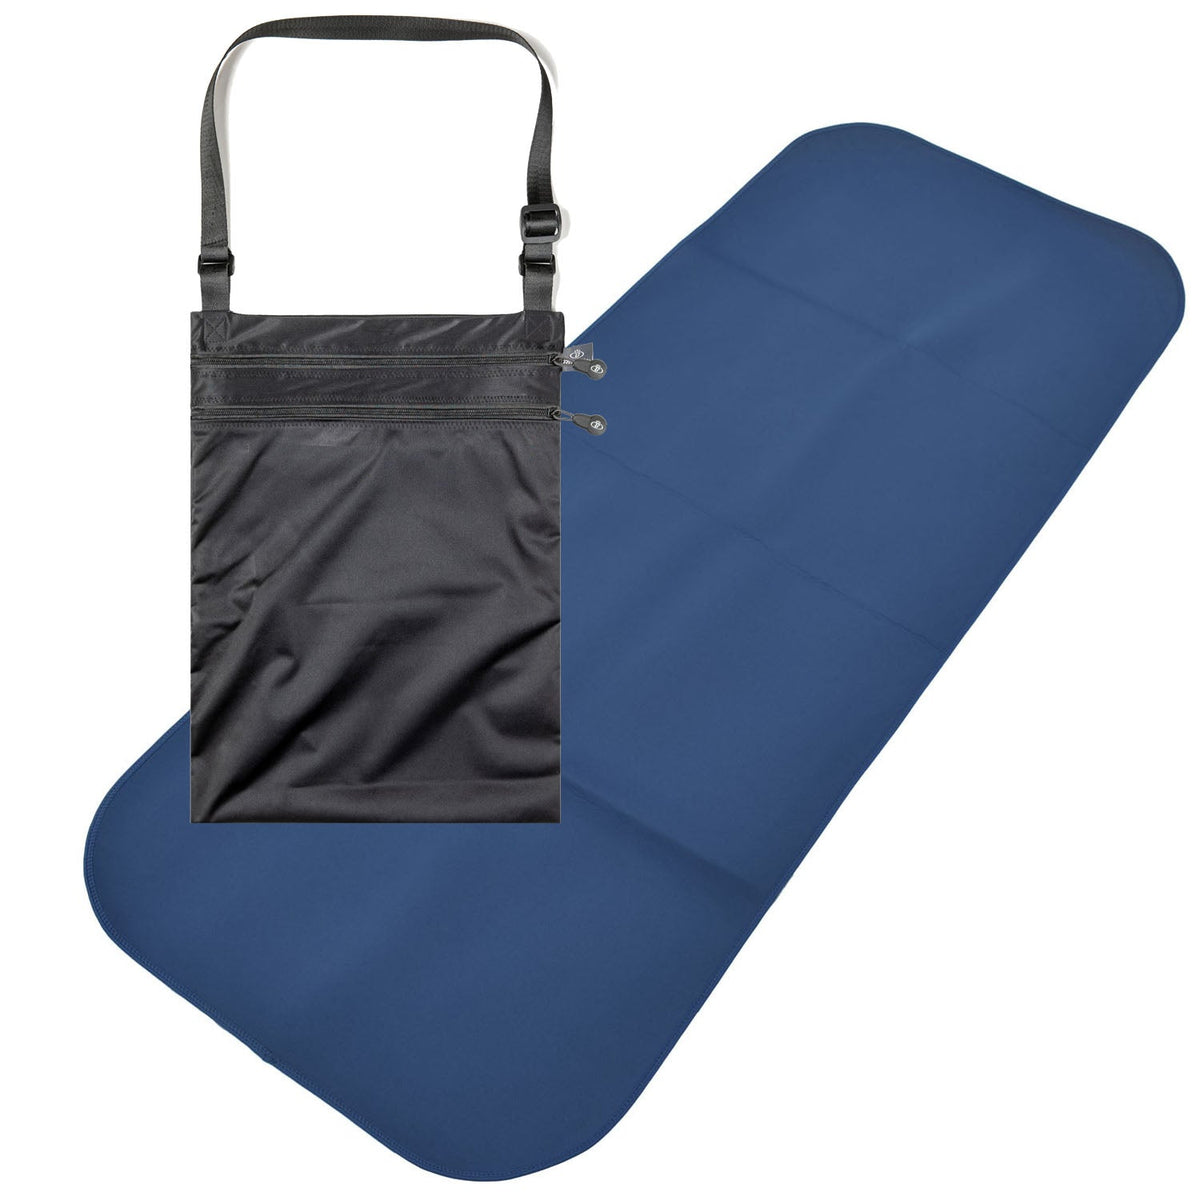 Adult and Teenager Changing Mat and WaterProof Bag Set - Steel Blue/Black (UK VAT Exempt) | Incontinence Aids | Care Designs